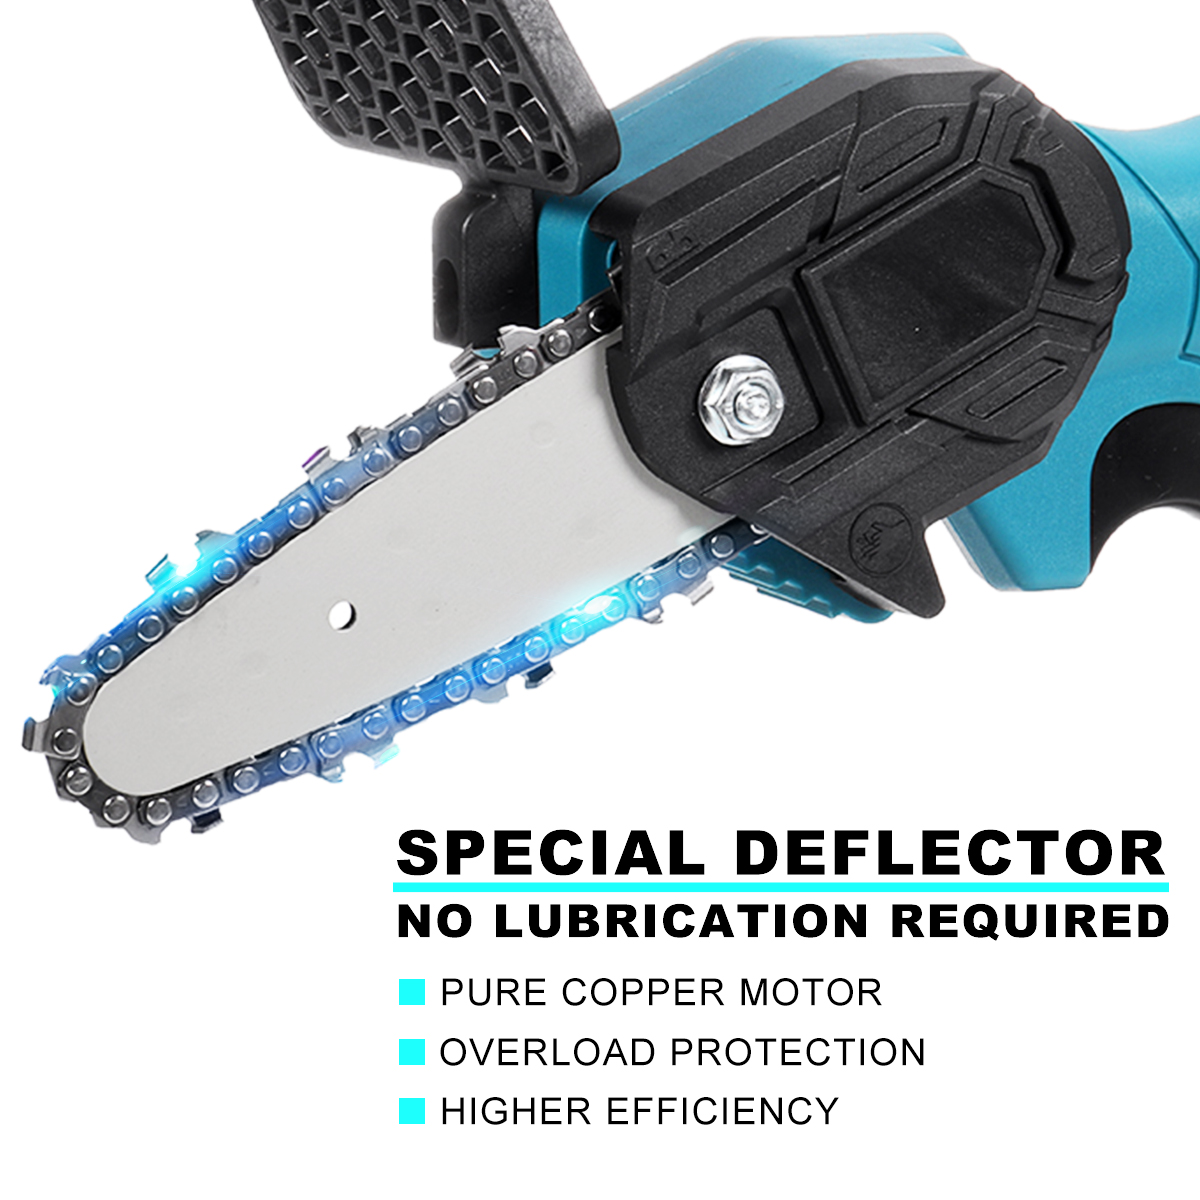 4inch-800W-48VF-Electric-Chain-Saw-Portable-Handheld-Wood-Cutter-Woodworking-Cutting-Tool-W-None1pc2-1827616-3